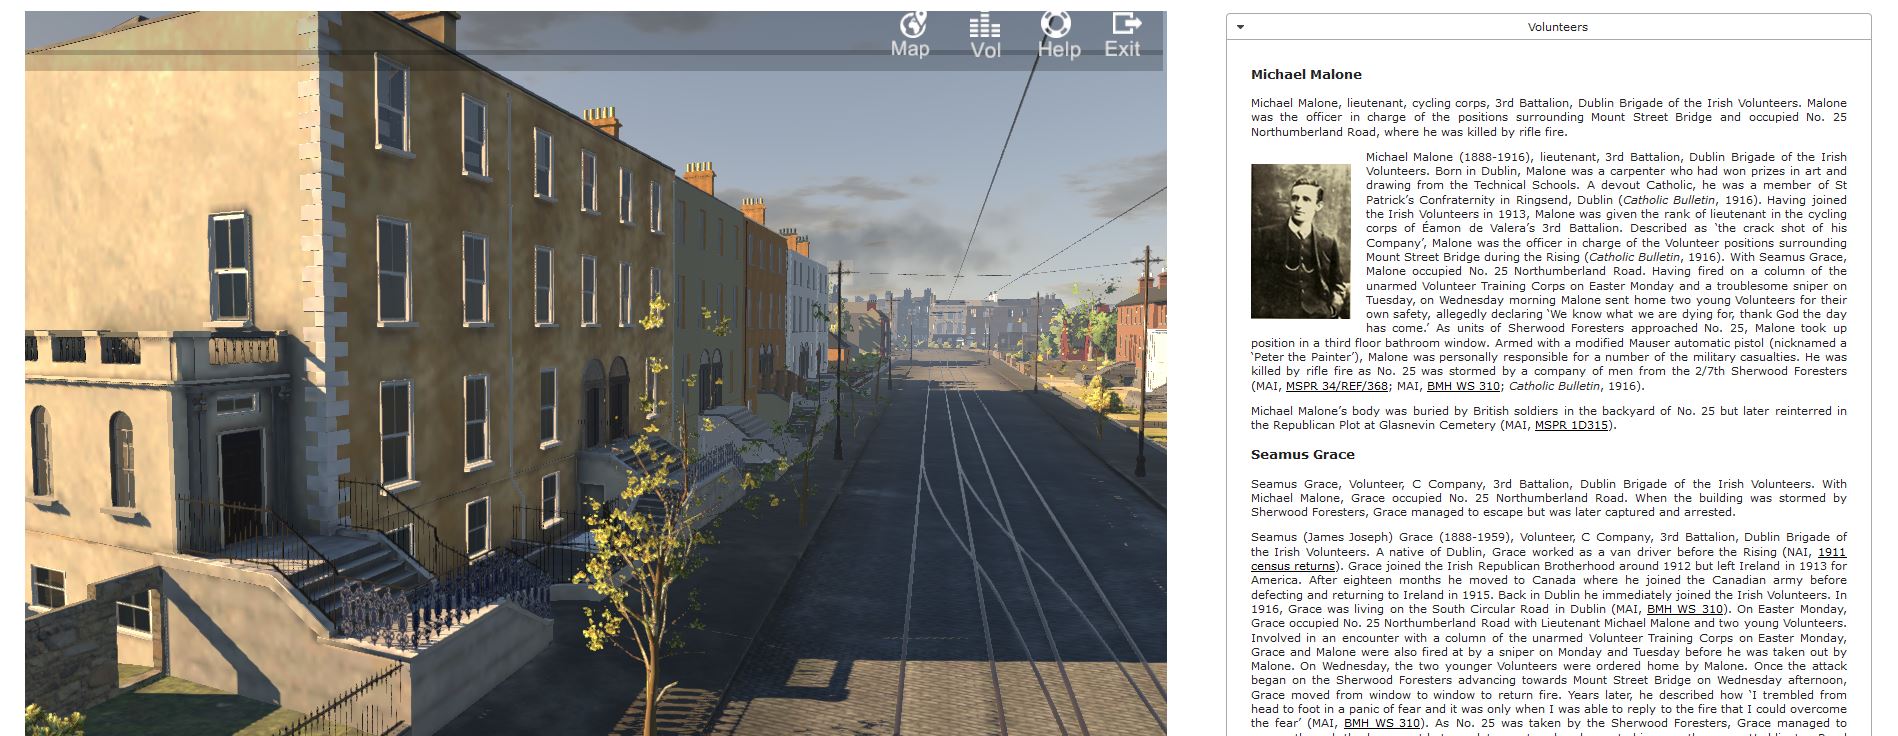 Figure 5. Second version of the Virtual World in WebGL Unity Web Player